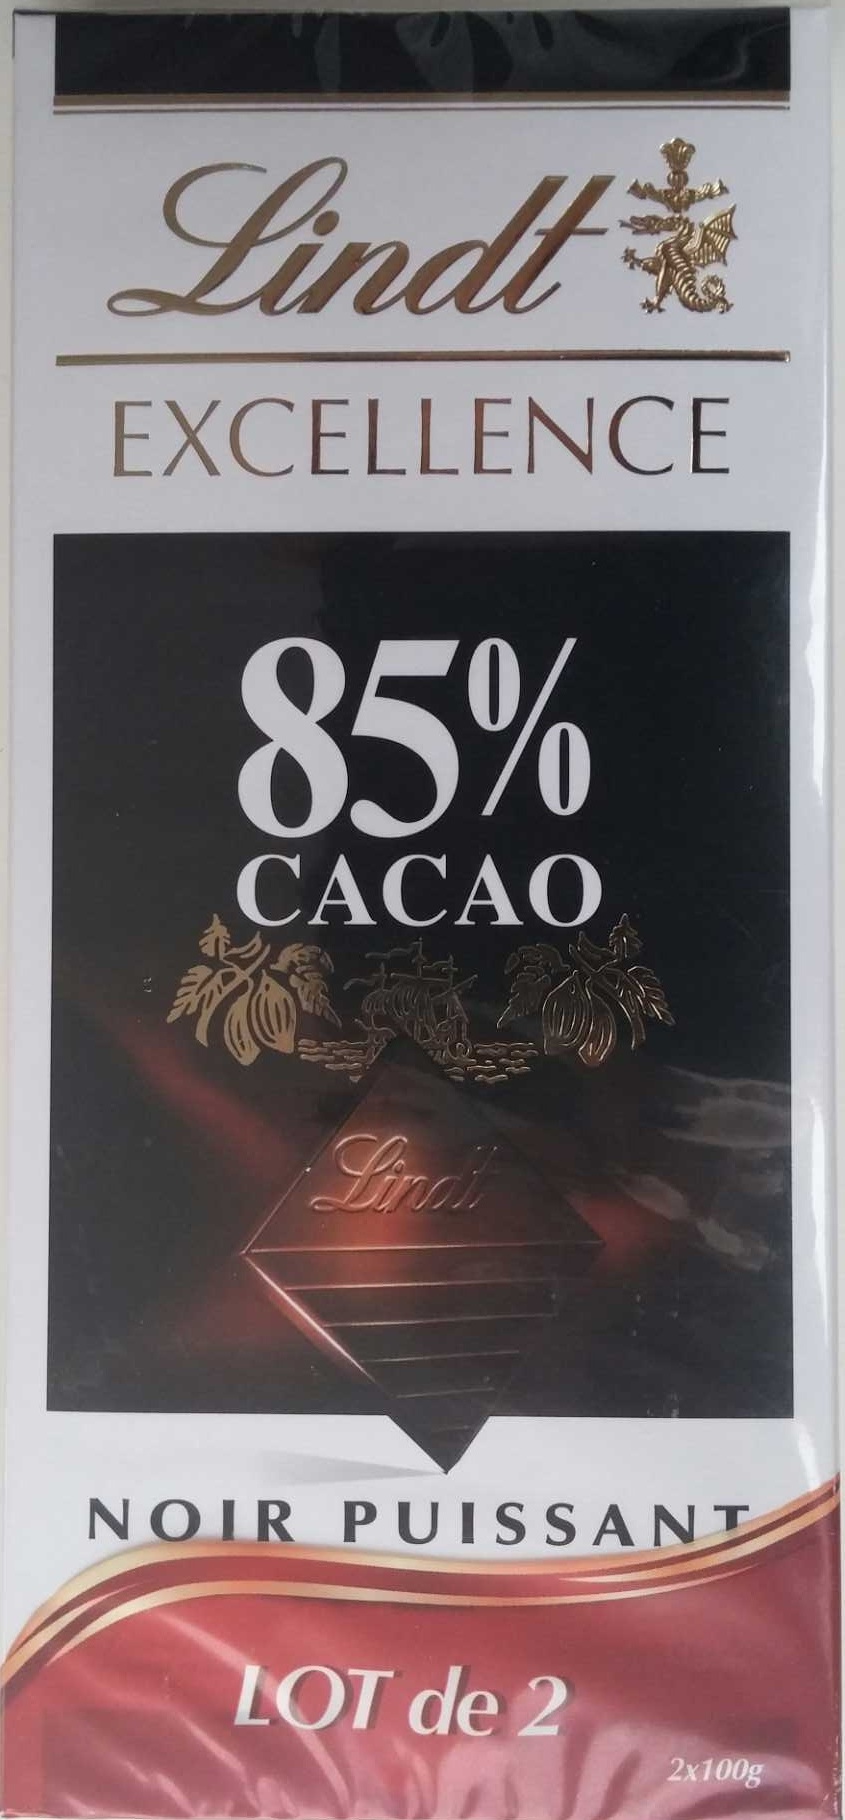 Excellence 85% Cacao Noir Puissant - Producto - fr